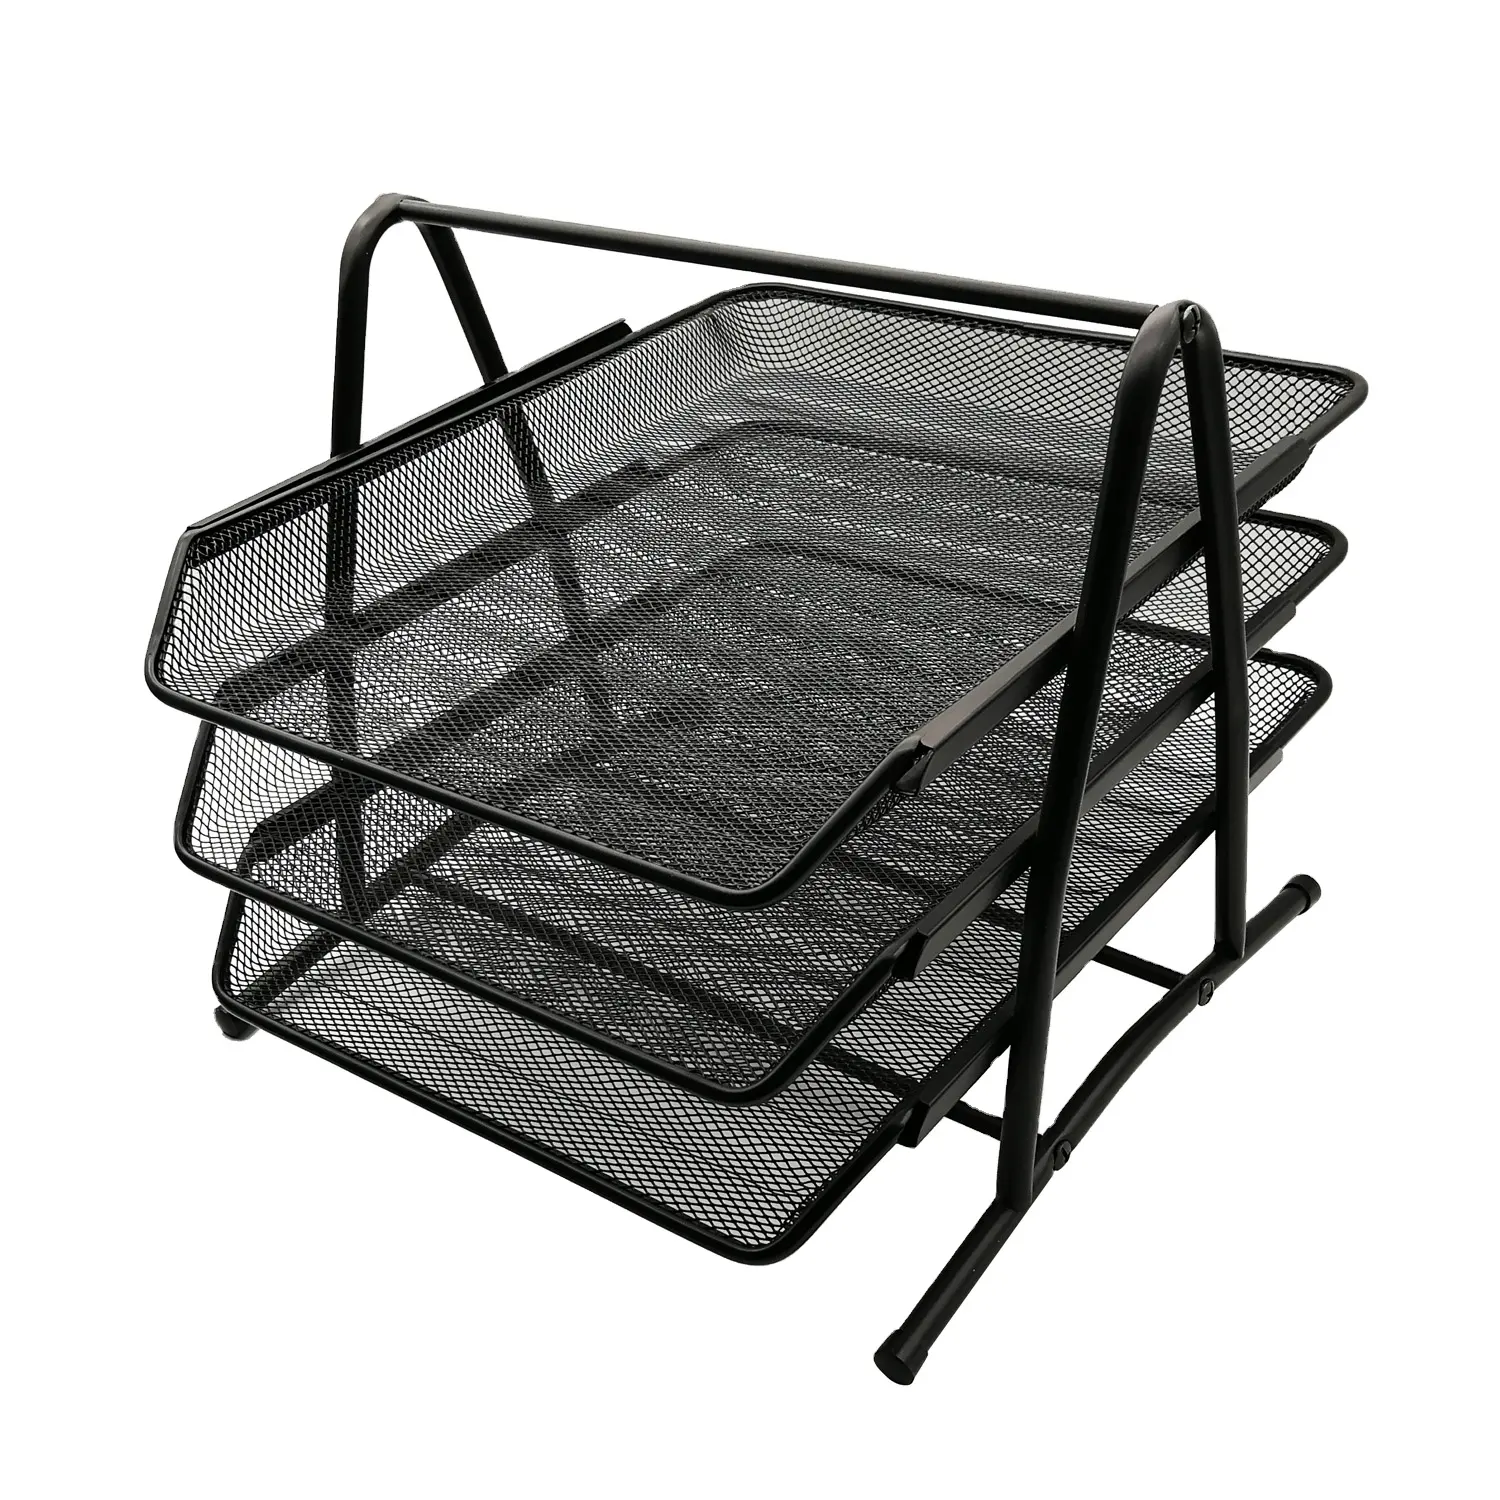 Modern design office metal wire mesh black foldable 3 layers document tray A4 paper tray desk file organizer